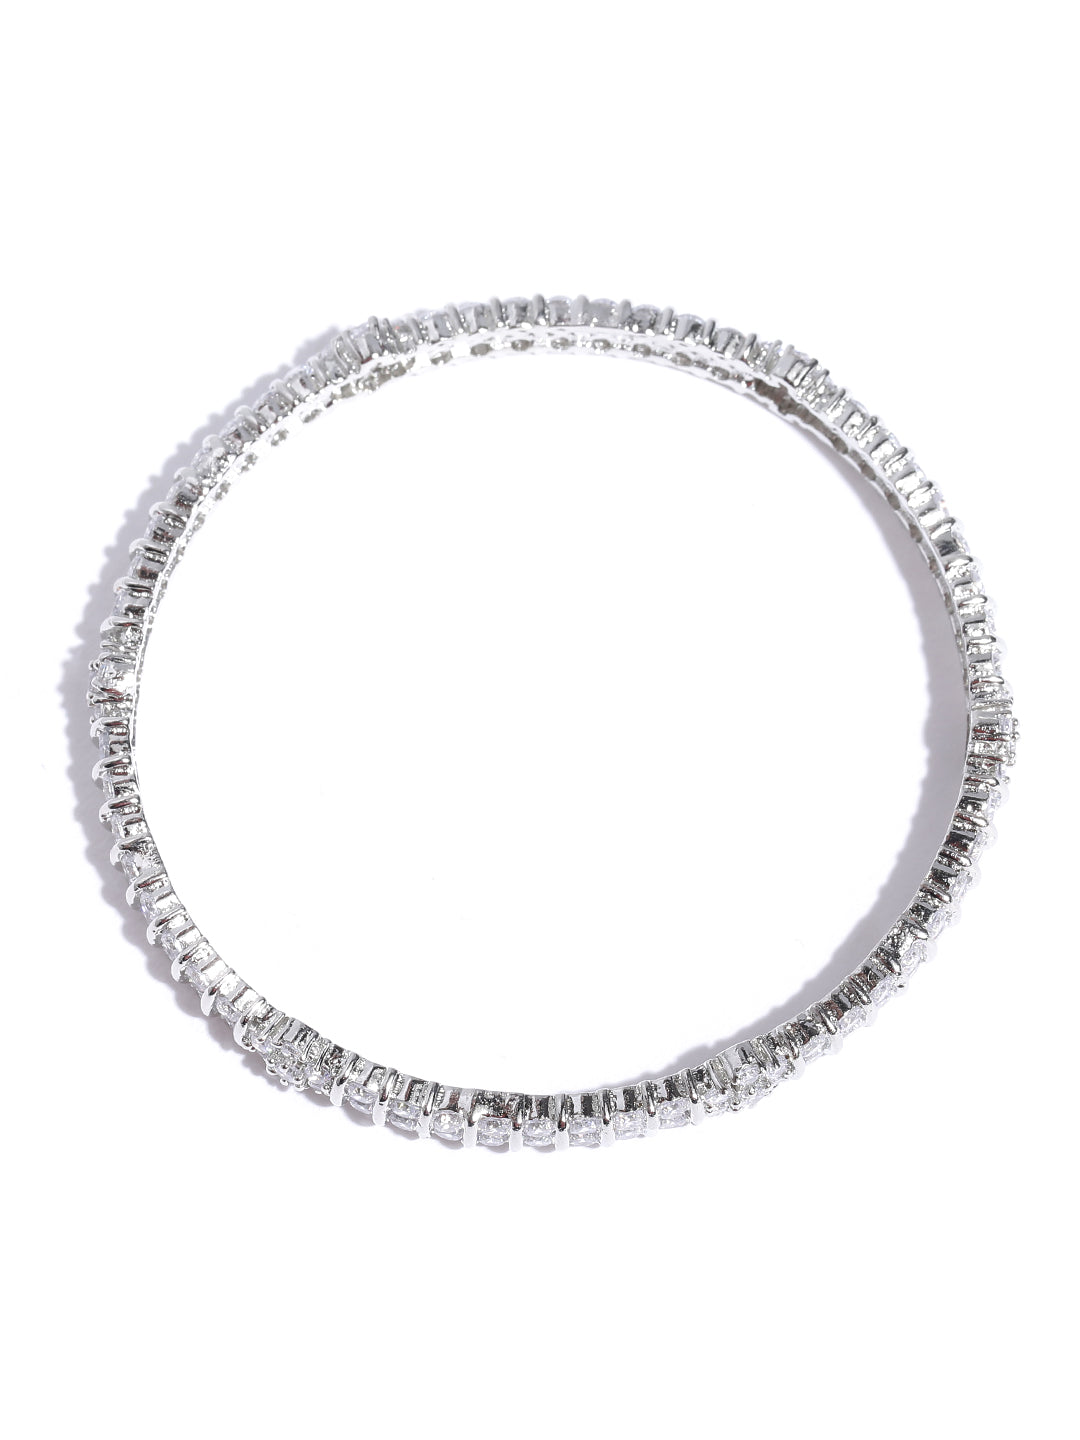 Dazzle Date-American Diamond Silver-Plated Set of 2 Bangles